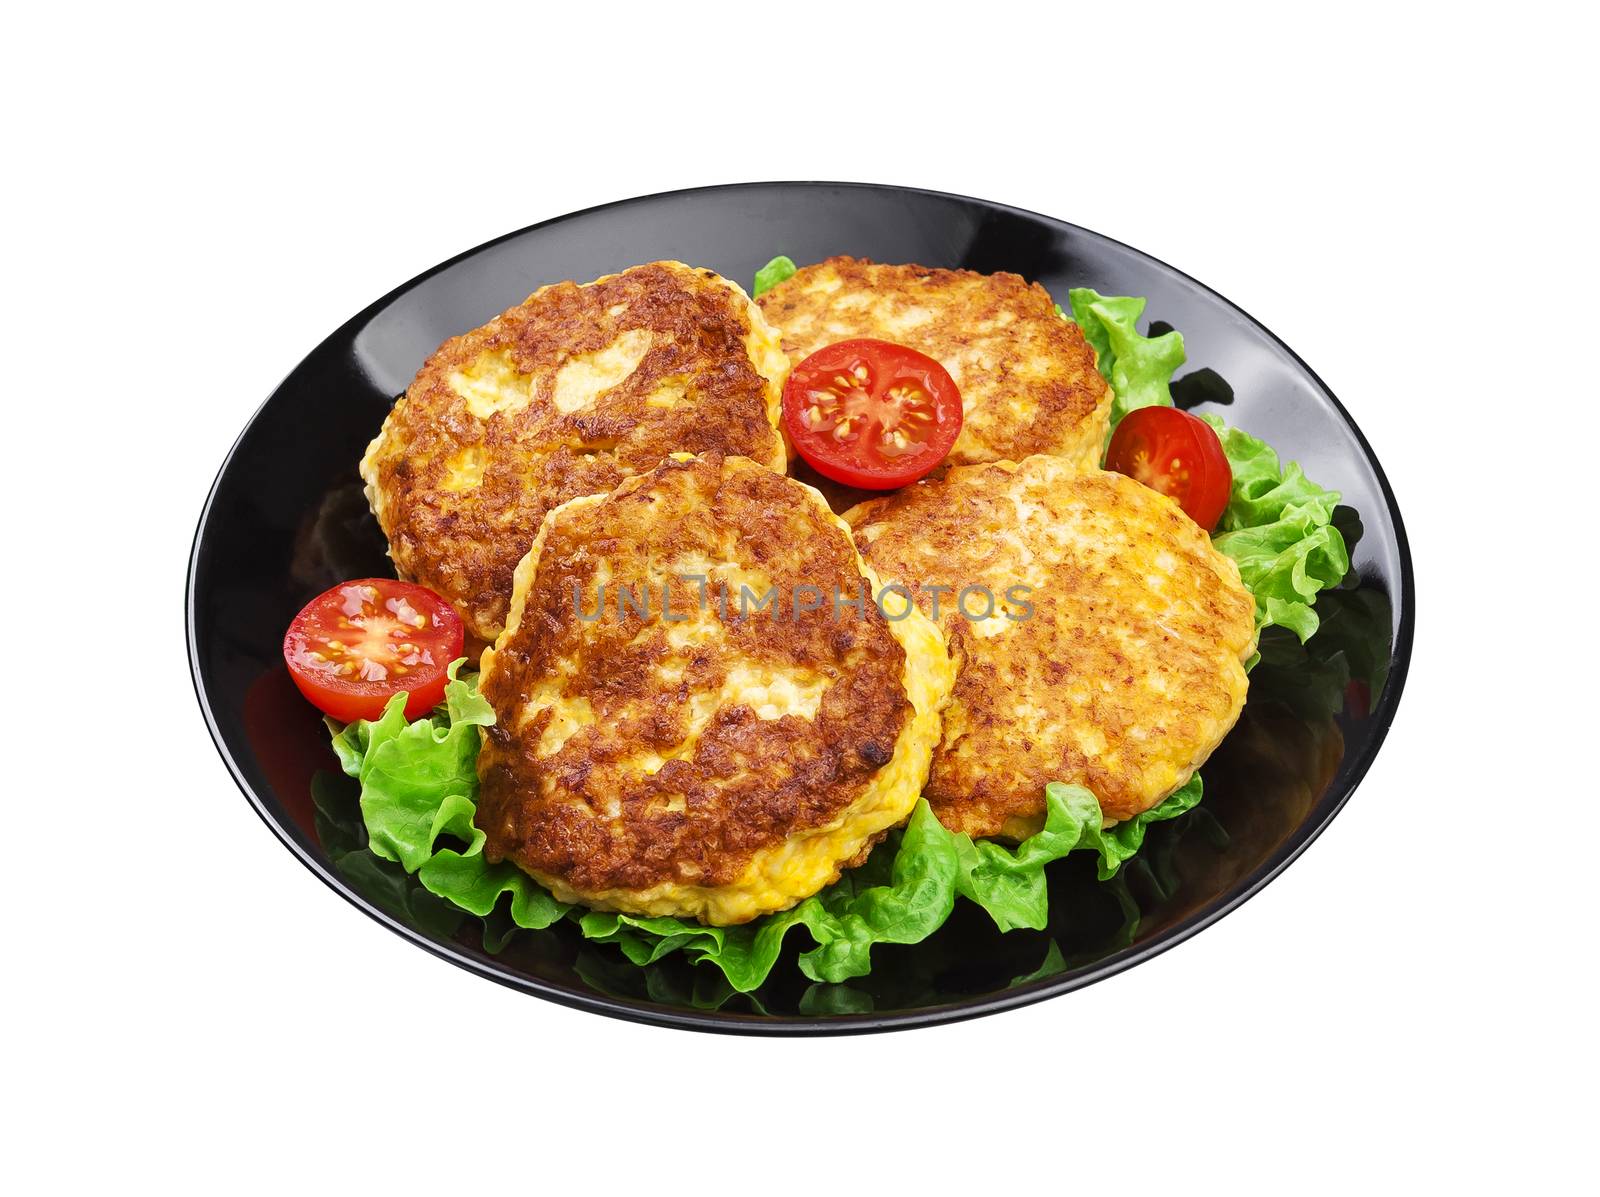 Stuffed with meat potato pancakes isolated on white background with clipping path